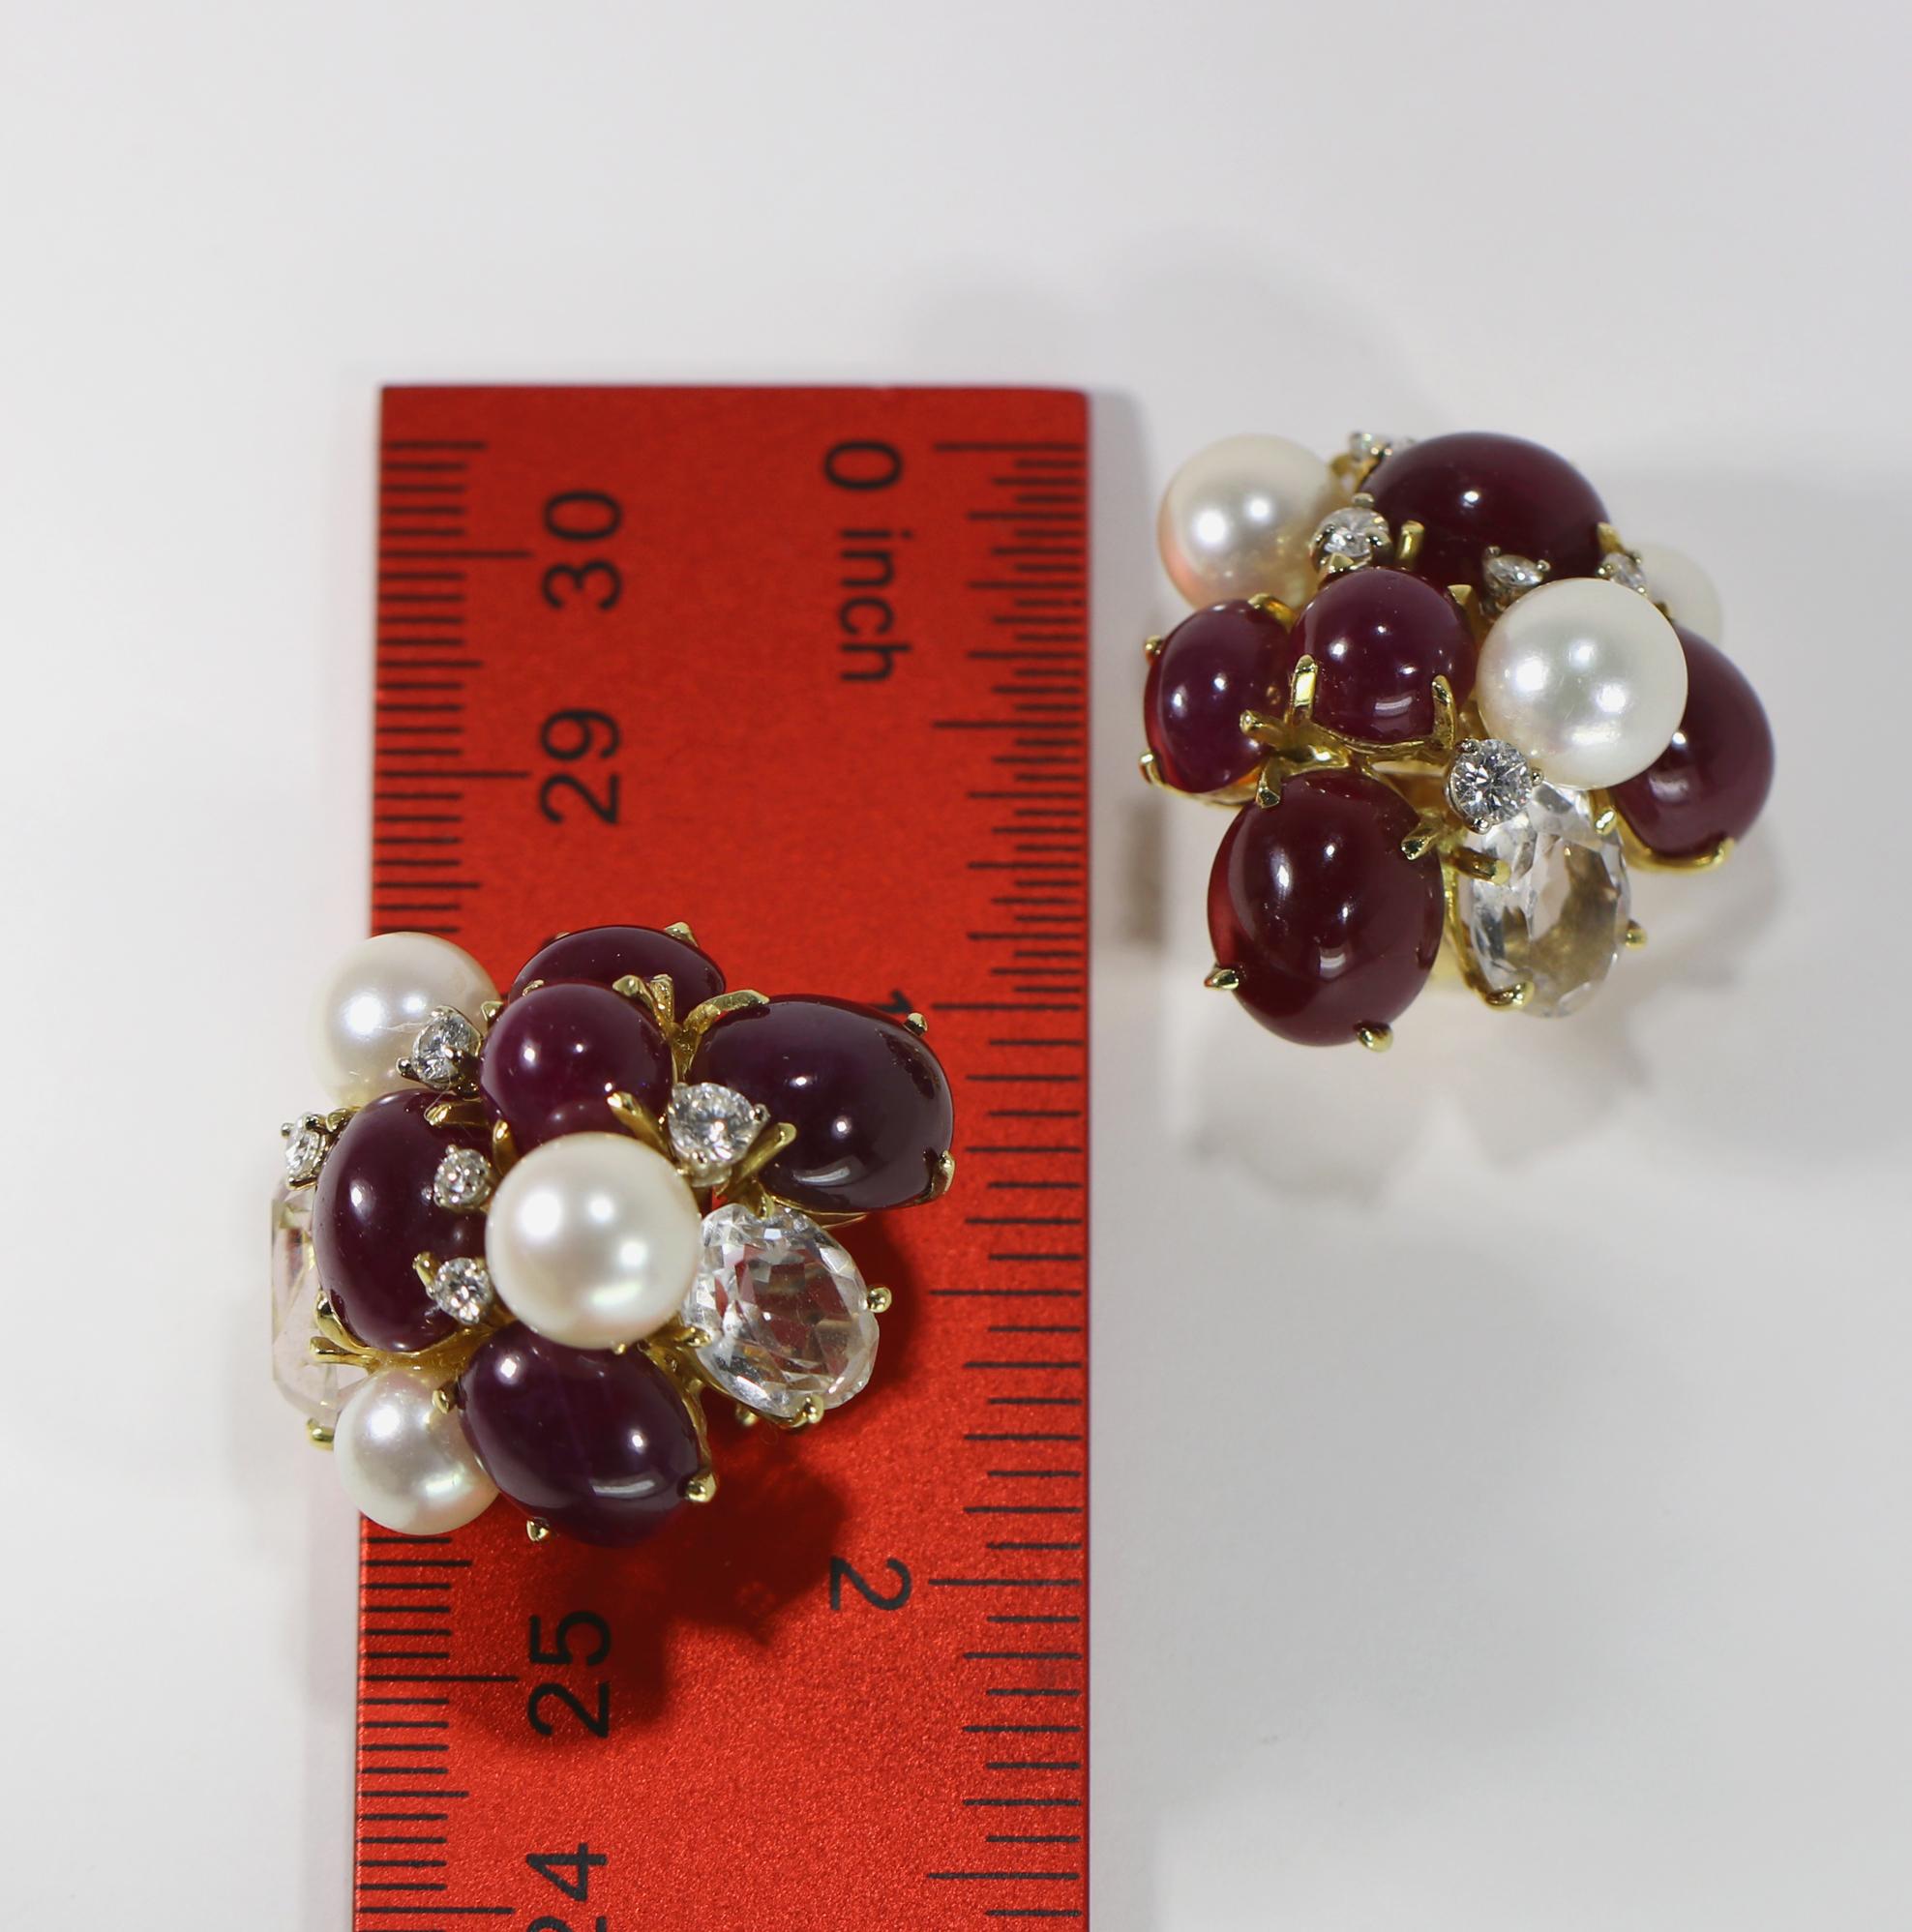 Seaman Schepps Bubble Earrings with Rubies Diamonds and Pearls 3